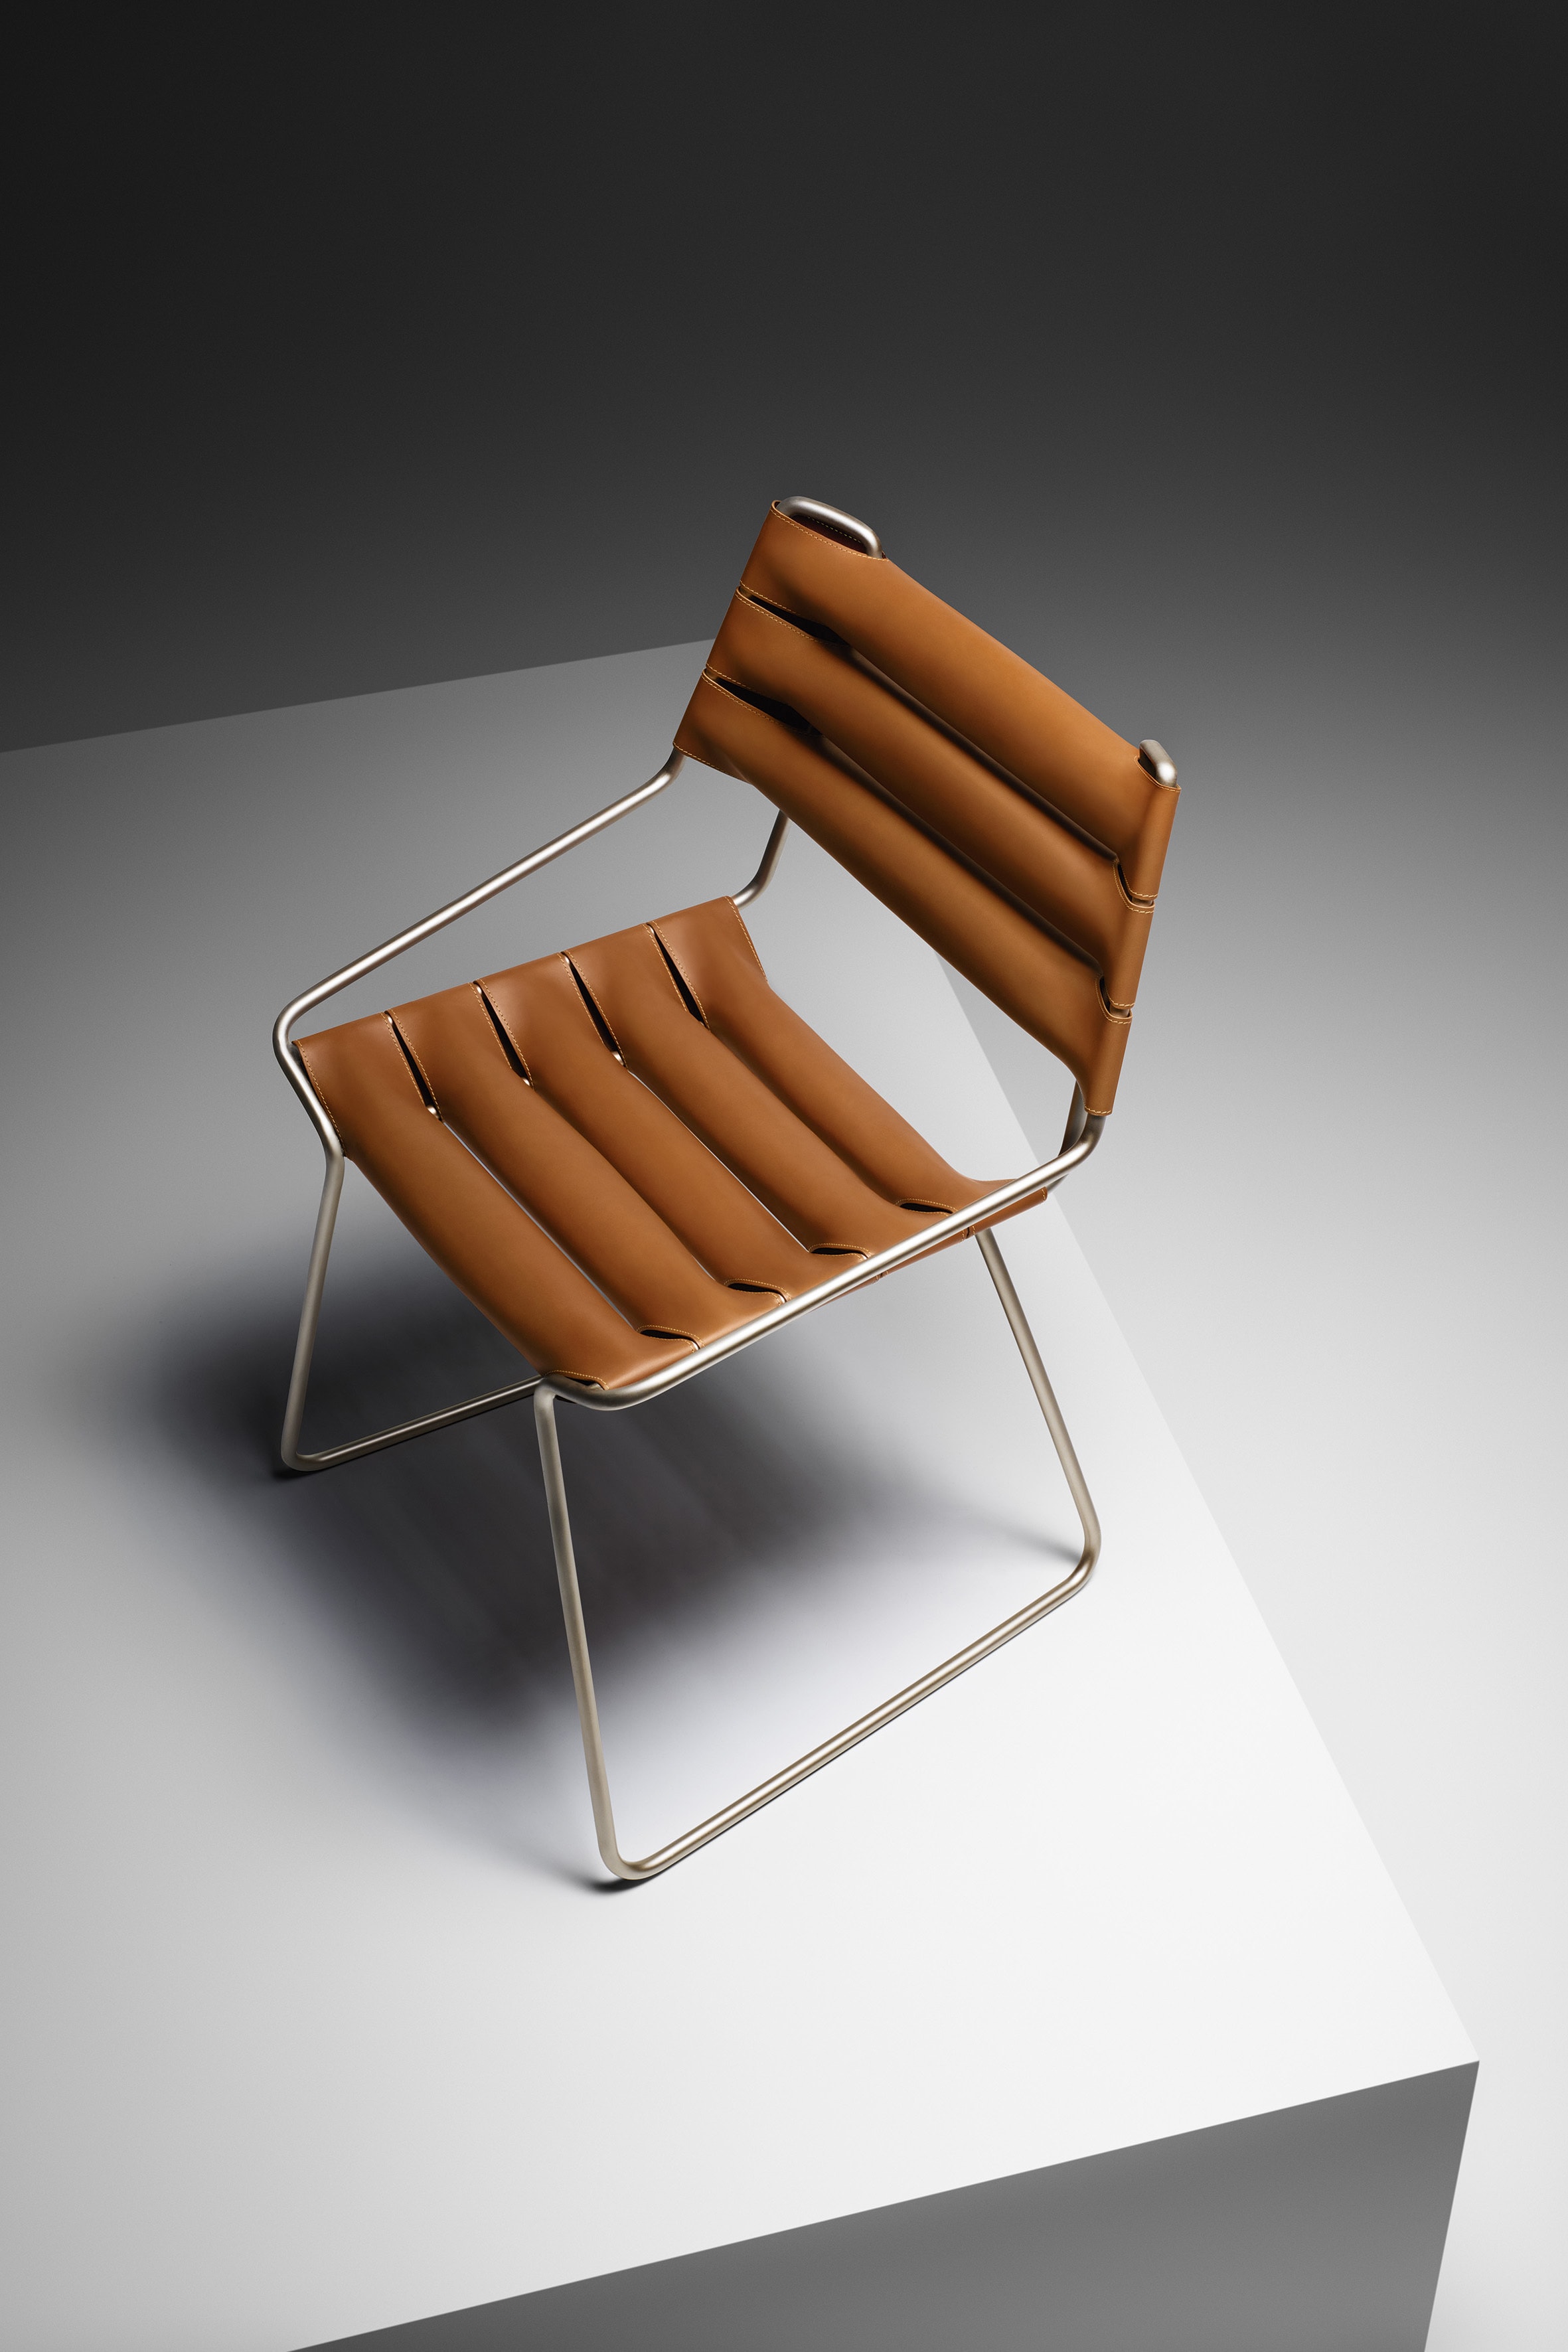 Louis Vuitton Objets Nomades Leather Chair